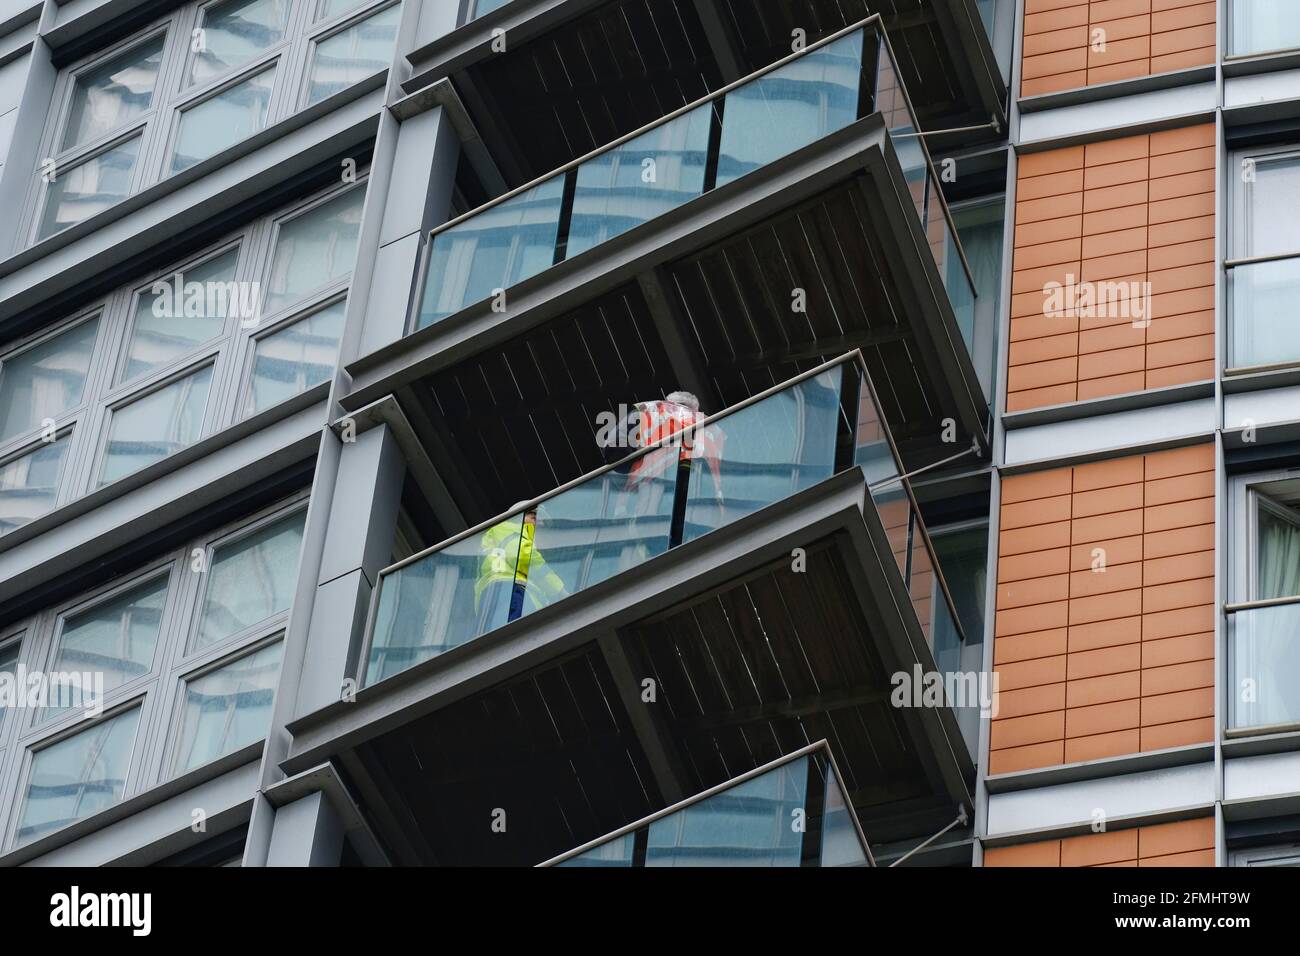 The fire service conduct safety checks after a major fire broke out at New Providence Wharf, a 19 storey high residential block in Blackwall. Stock Photo